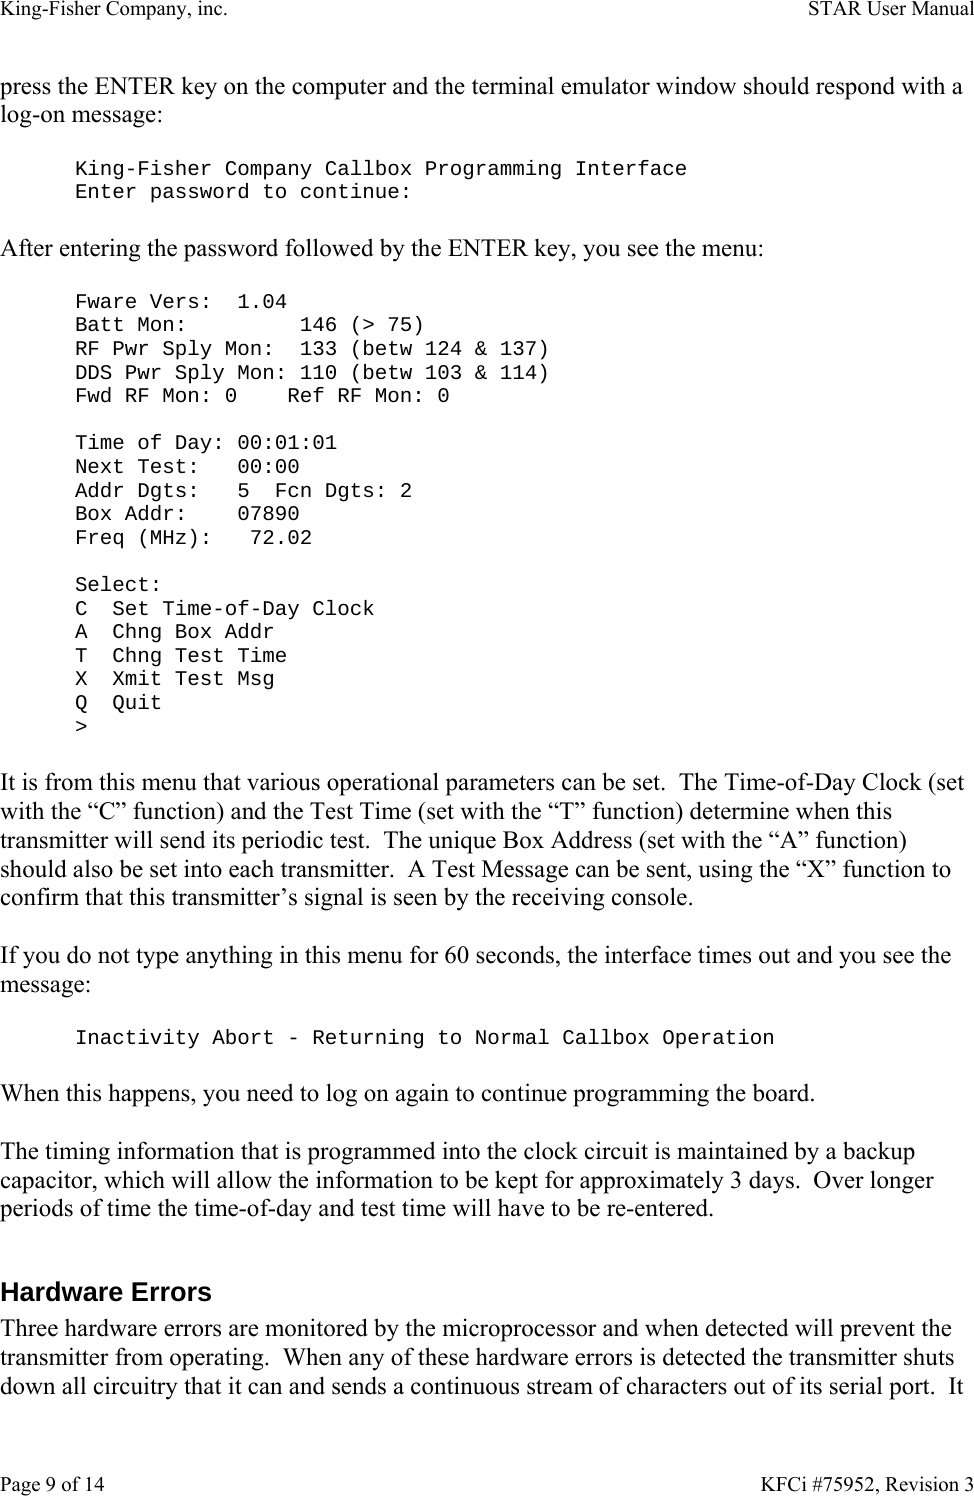 King-Fisher Company, inc.    STAR User Manual Page 9 of 14    KFCi #75952, Revision 3 press the ENTER key on the computer and the terminal emulator window should respond with a log-on message:  King-Fisher Company Callbox Programming Interface Enter password to continue:  After entering the password followed by the ENTER key, you see the menu:  Fware Vers:  1.04 Batt Mon:         146 (&gt; 75) RF Pwr Sply Mon:  133 (betw 124 &amp; 137) DDS Pwr Sply Mon: 110 (betw 103 &amp; 114) Fwd RF Mon: 0    Ref RF Mon: 0  Time of Day: 00:01:01 Next Test:   00:00 Addr Dgts:   5  Fcn Dgts: 2 Box Addr:    07890 Freq (MHz):   72.02  Select: C  Set Time-of-Day Clock A  Chng Box Addr T  Chng Test Time X  Xmit Test Msg Q  Quit &gt;  It is from this menu that various operational parameters can be set.  The Time-of-Day Clock (set with the “C” function) and the Test Time (set with the “T” function) determine when this transmitter will send its periodic test.  The unique Box Address (set with the “A” function) should also be set into each transmitter.  A Test Message can be sent, using the “X” function to confirm that this transmitter’s signal is seen by the receiving console.  If you do not type anything in this menu for 60 seconds, the interface times out and you see the message:  Inactivity Abort - Returning to Normal Callbox Operation  When this happens, you need to log on again to continue programming the board.  The timing information that is programmed into the clock circuit is maintained by a backup capacitor, which will allow the information to be kept for approximately 3 days.  Over longer periods of time the time-of-day and test time will have to be re-entered.  Hardware Errors Three hardware errors are monitored by the microprocessor and when detected will prevent the transmitter from operating.  When any of these hardware errors is detected the transmitter shuts down all circuitry that it can and sends a continuous stream of characters out of its serial port.  It 